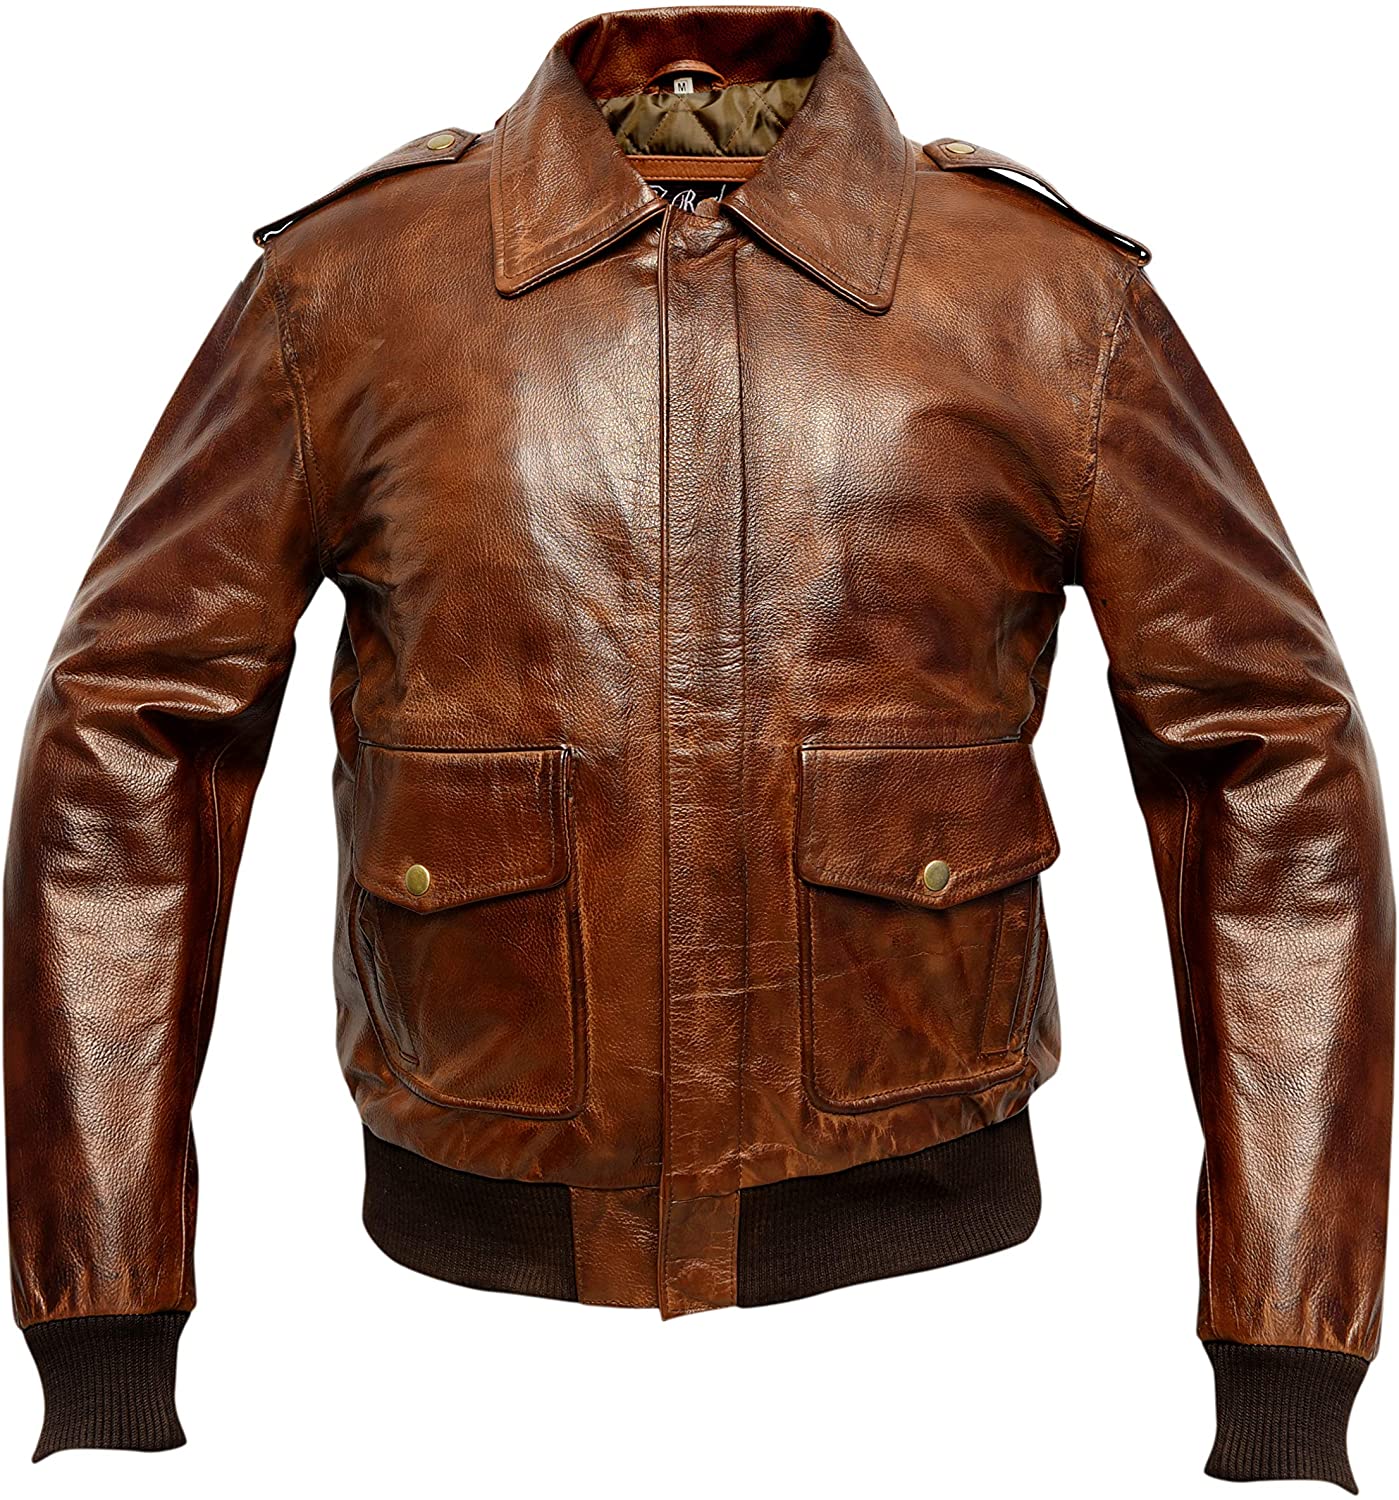 A2 Waxed Distressed Brown Real Cowhide Leather Bomber Flight Jacket